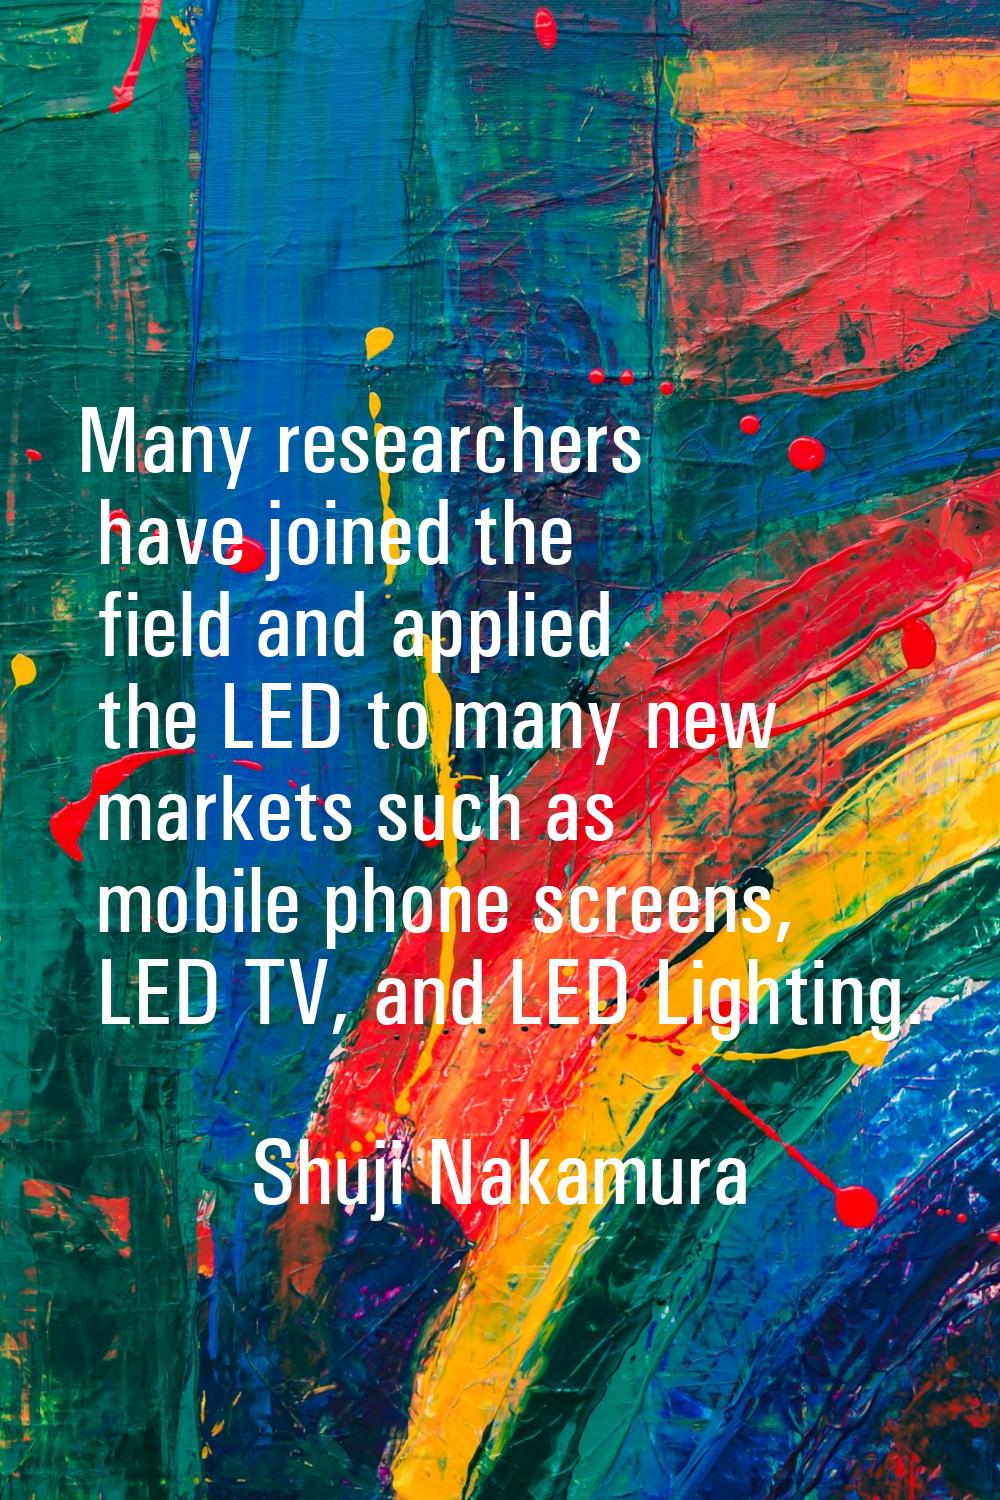 Many researchers have joined the field and applied the LED to many new markets such as mobile phone